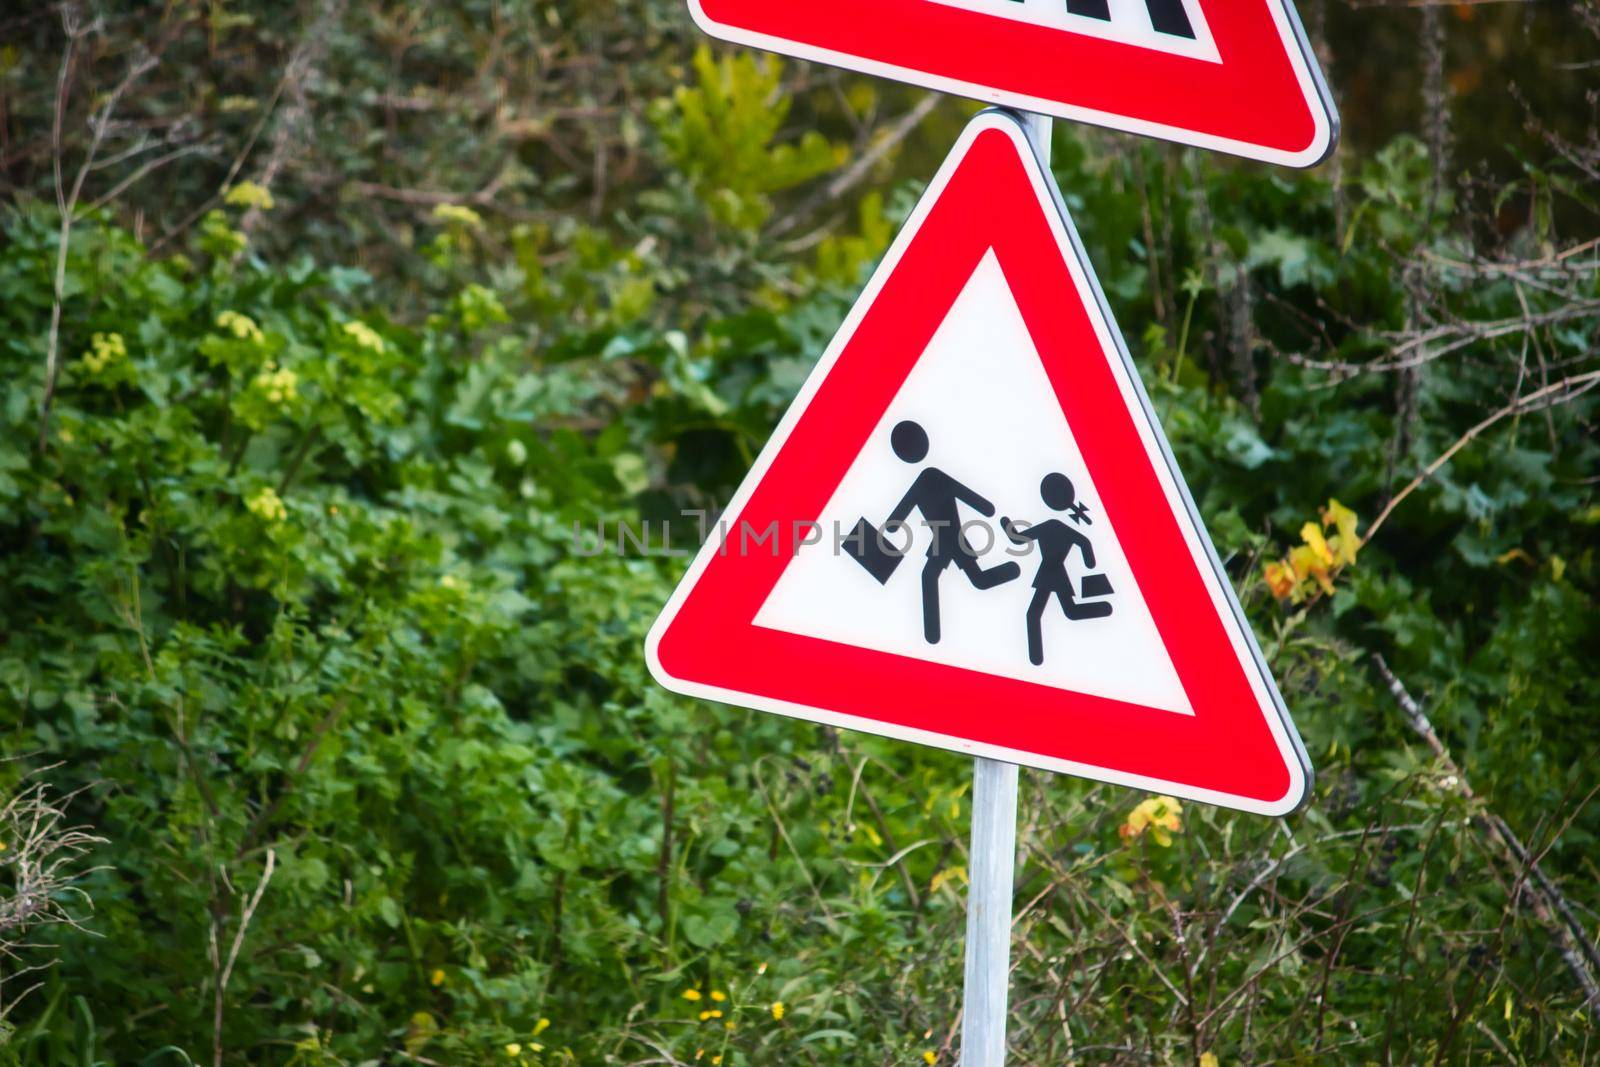 School children crossing sign with trees and plants in the background by tennesseewitney